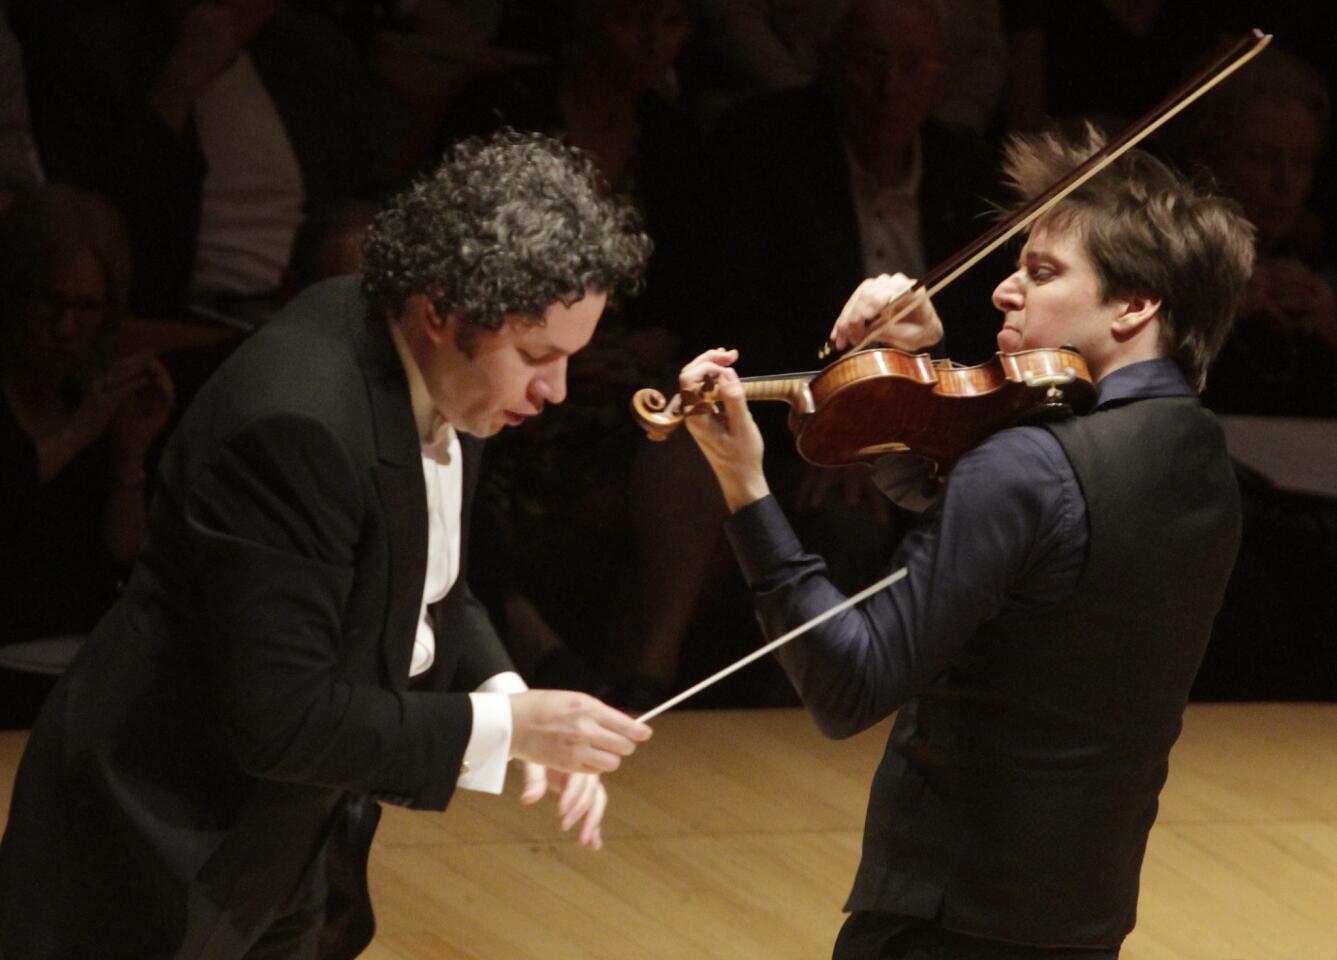 Violinist Joshua Bell performs Jean Sibelius' Violin Concerto as Gustavo Dudamel conducts the L.A. Phil at Walt Disney Concert Hall. Besides Sibelius, Dudamel conducted Mozart's Symphony No. 36, "Linz," and "The Abduction From the Seraglio" Overture.